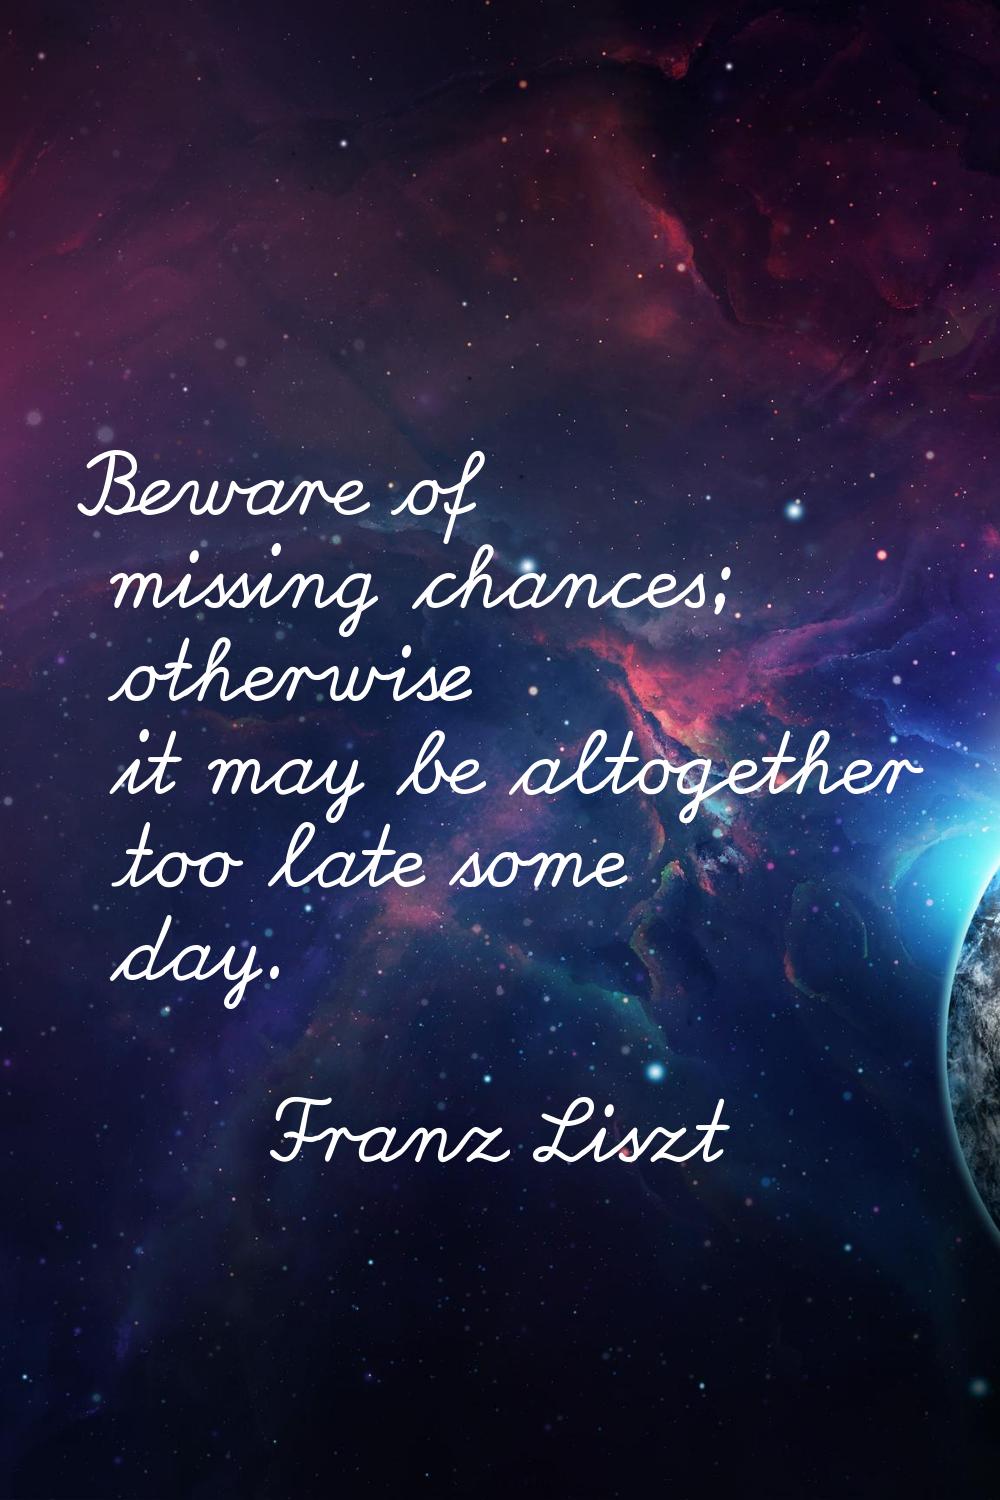 Beware of missing chances; otherwise it may be altogether too late some day.